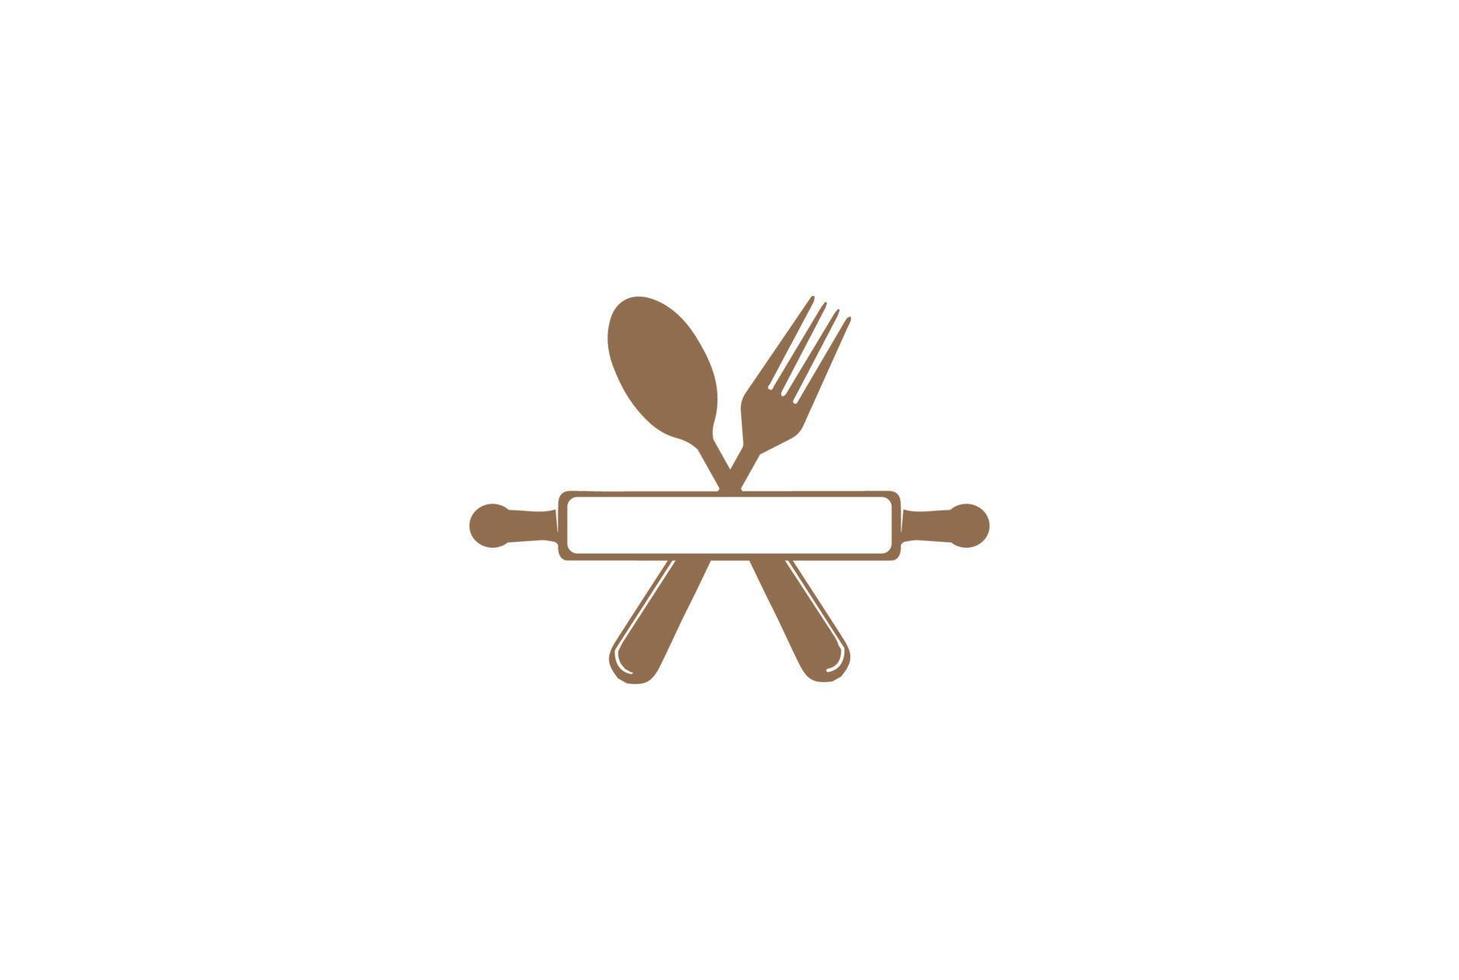 Vintage Hipster Rolling Pin with Spoon Fork for Cafe Bakery Restaurant Logo Design Vector